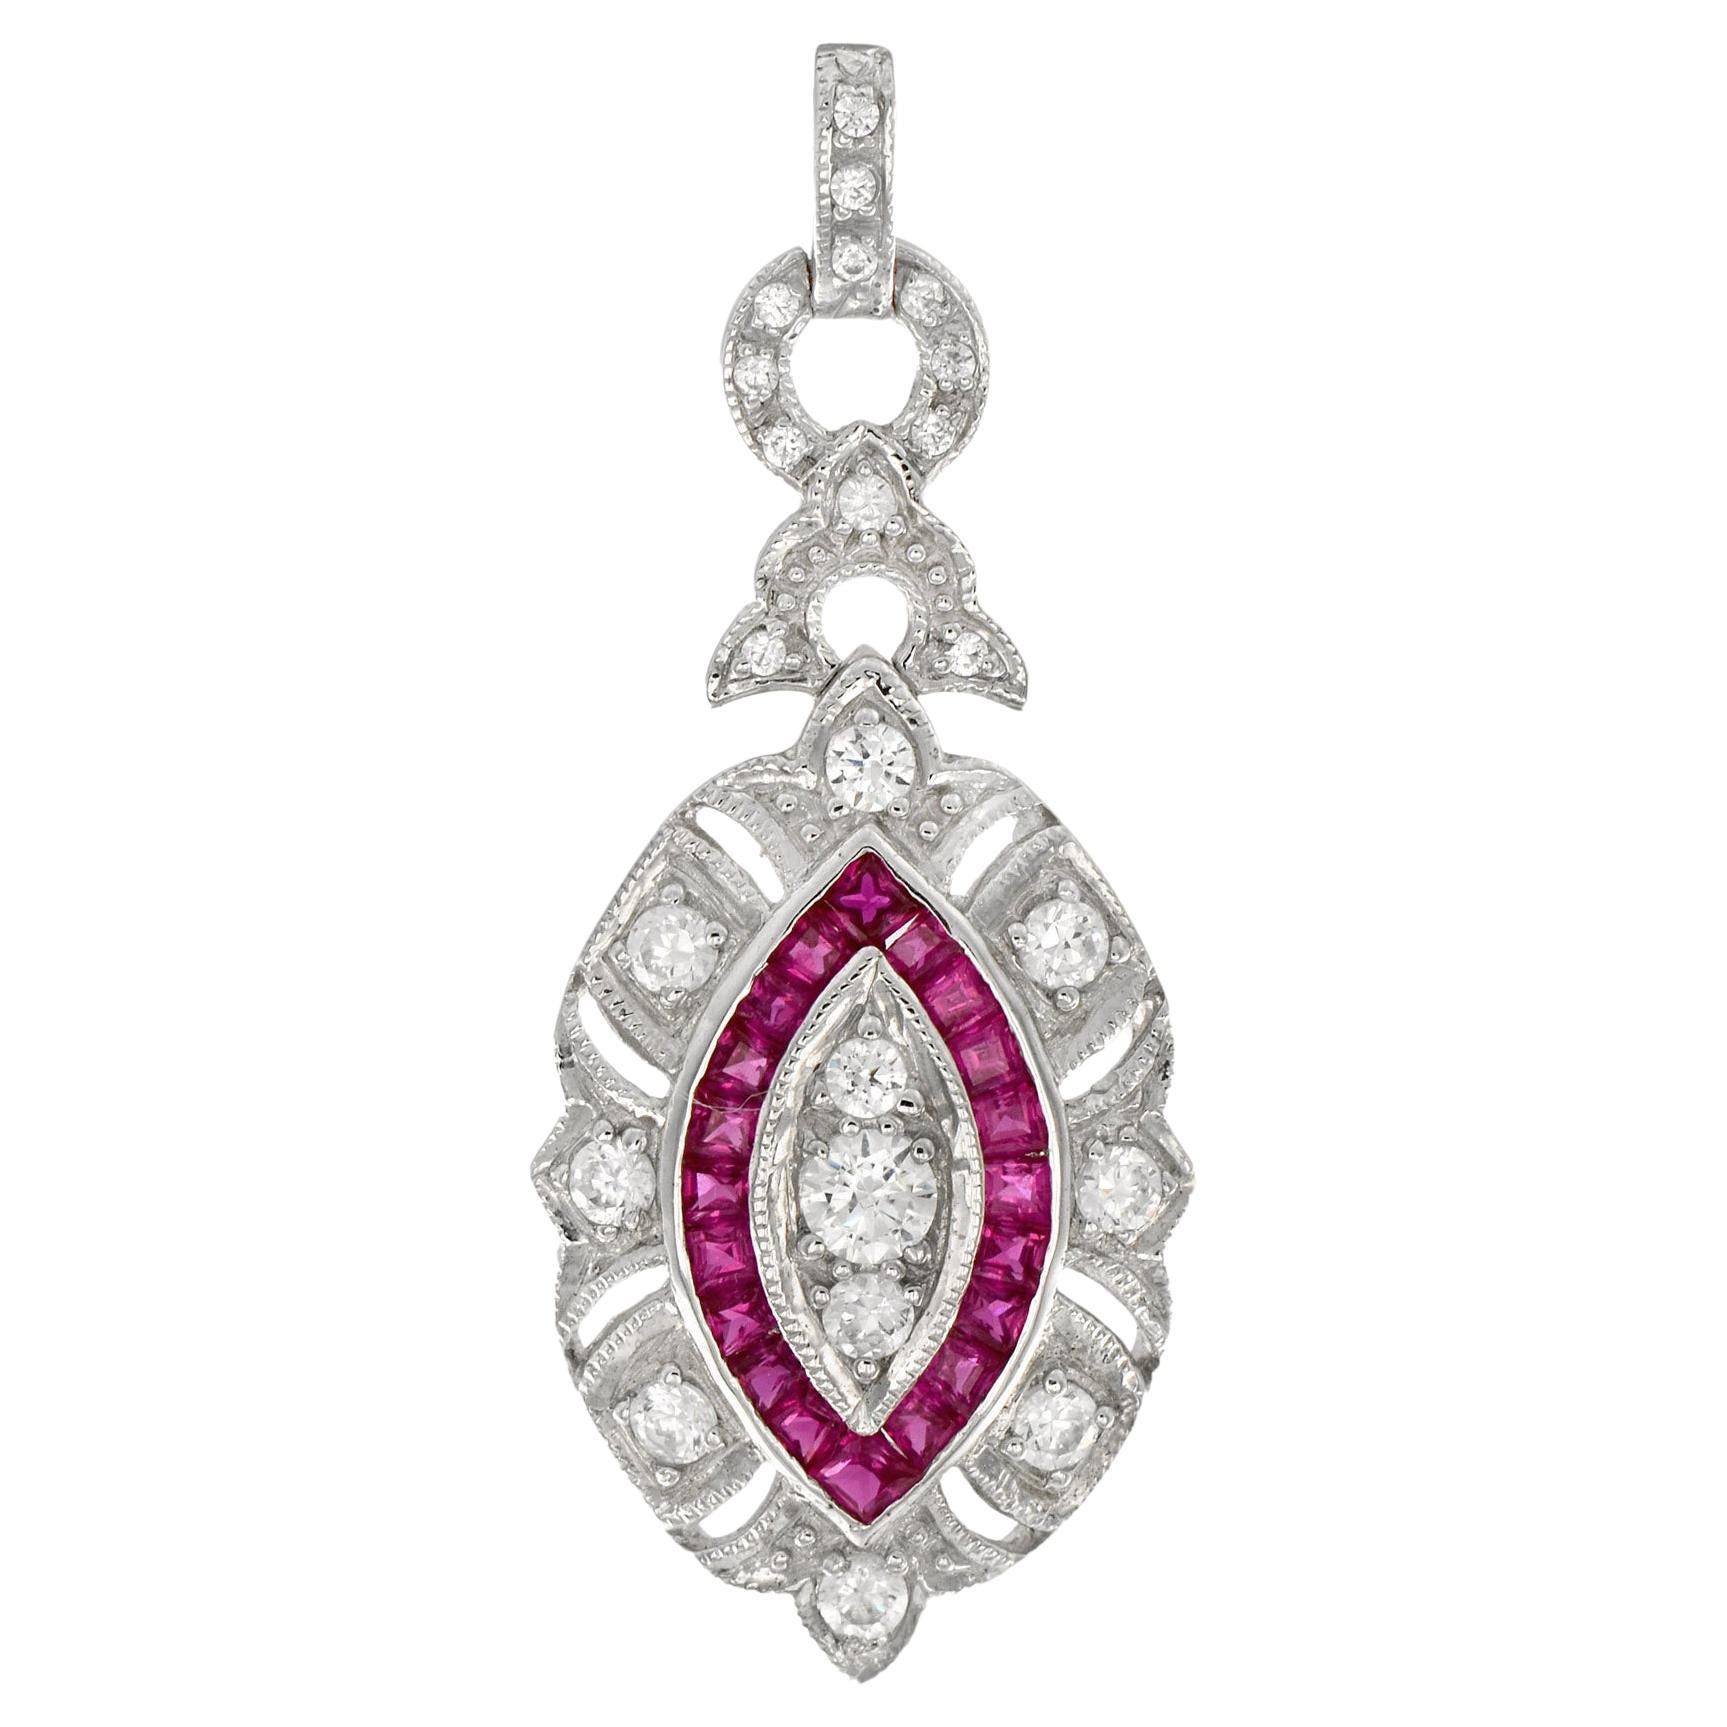 Diamond and Ruby Art Deco Style Pendant in 18K White Gold